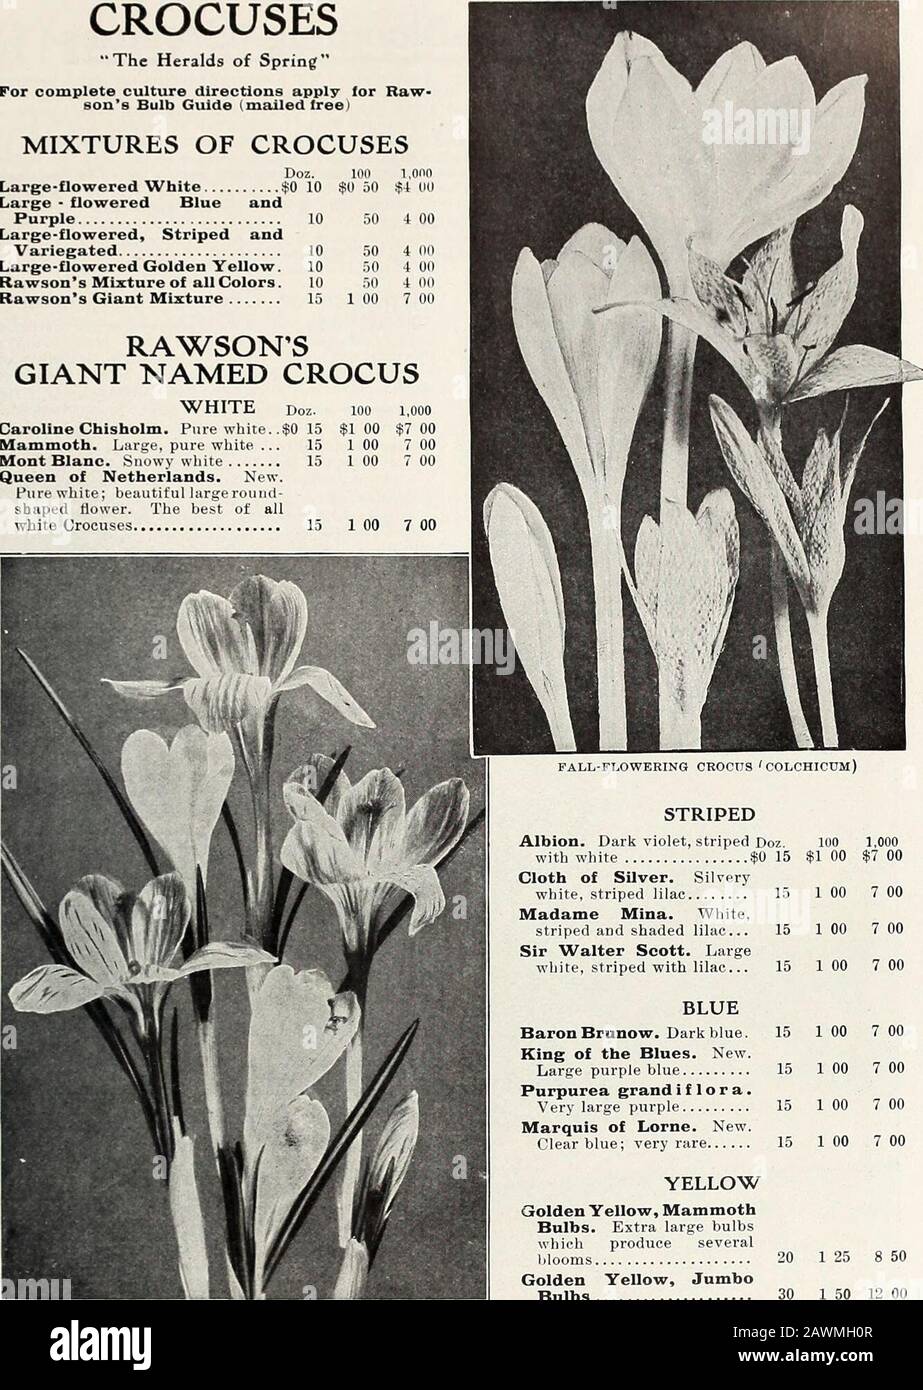 Rawson's bulb hand book / W.WRawson & Co. . base and olive-green externalcolnrini.. Each.l5 cts.: doz.. $1.80: 100. $12. Montana. Interesting dwarf species; flowers scarlet,with black jind yellow blotch. Each, 15 cts.: doz.,$1.80: 100, $12. We furnish 6 bulbs at the dozen rate; 25 at the 100 rate; 250 at the 1,000 rate RAWSONS BULBS FOR FALL 1909 17 CROCUSES The Heralds of Spring For complete culture directions apply lor Raw-sons Bulb Guide (mailed free) MIXTURES OF CROCUSES Doz. Kill 1,000 Large-flowered White $0 10 $0 oO $4 (Hi Large - flowered Blue and Purple 10 50 4 00 Large-flowered, Stri Stock Photo